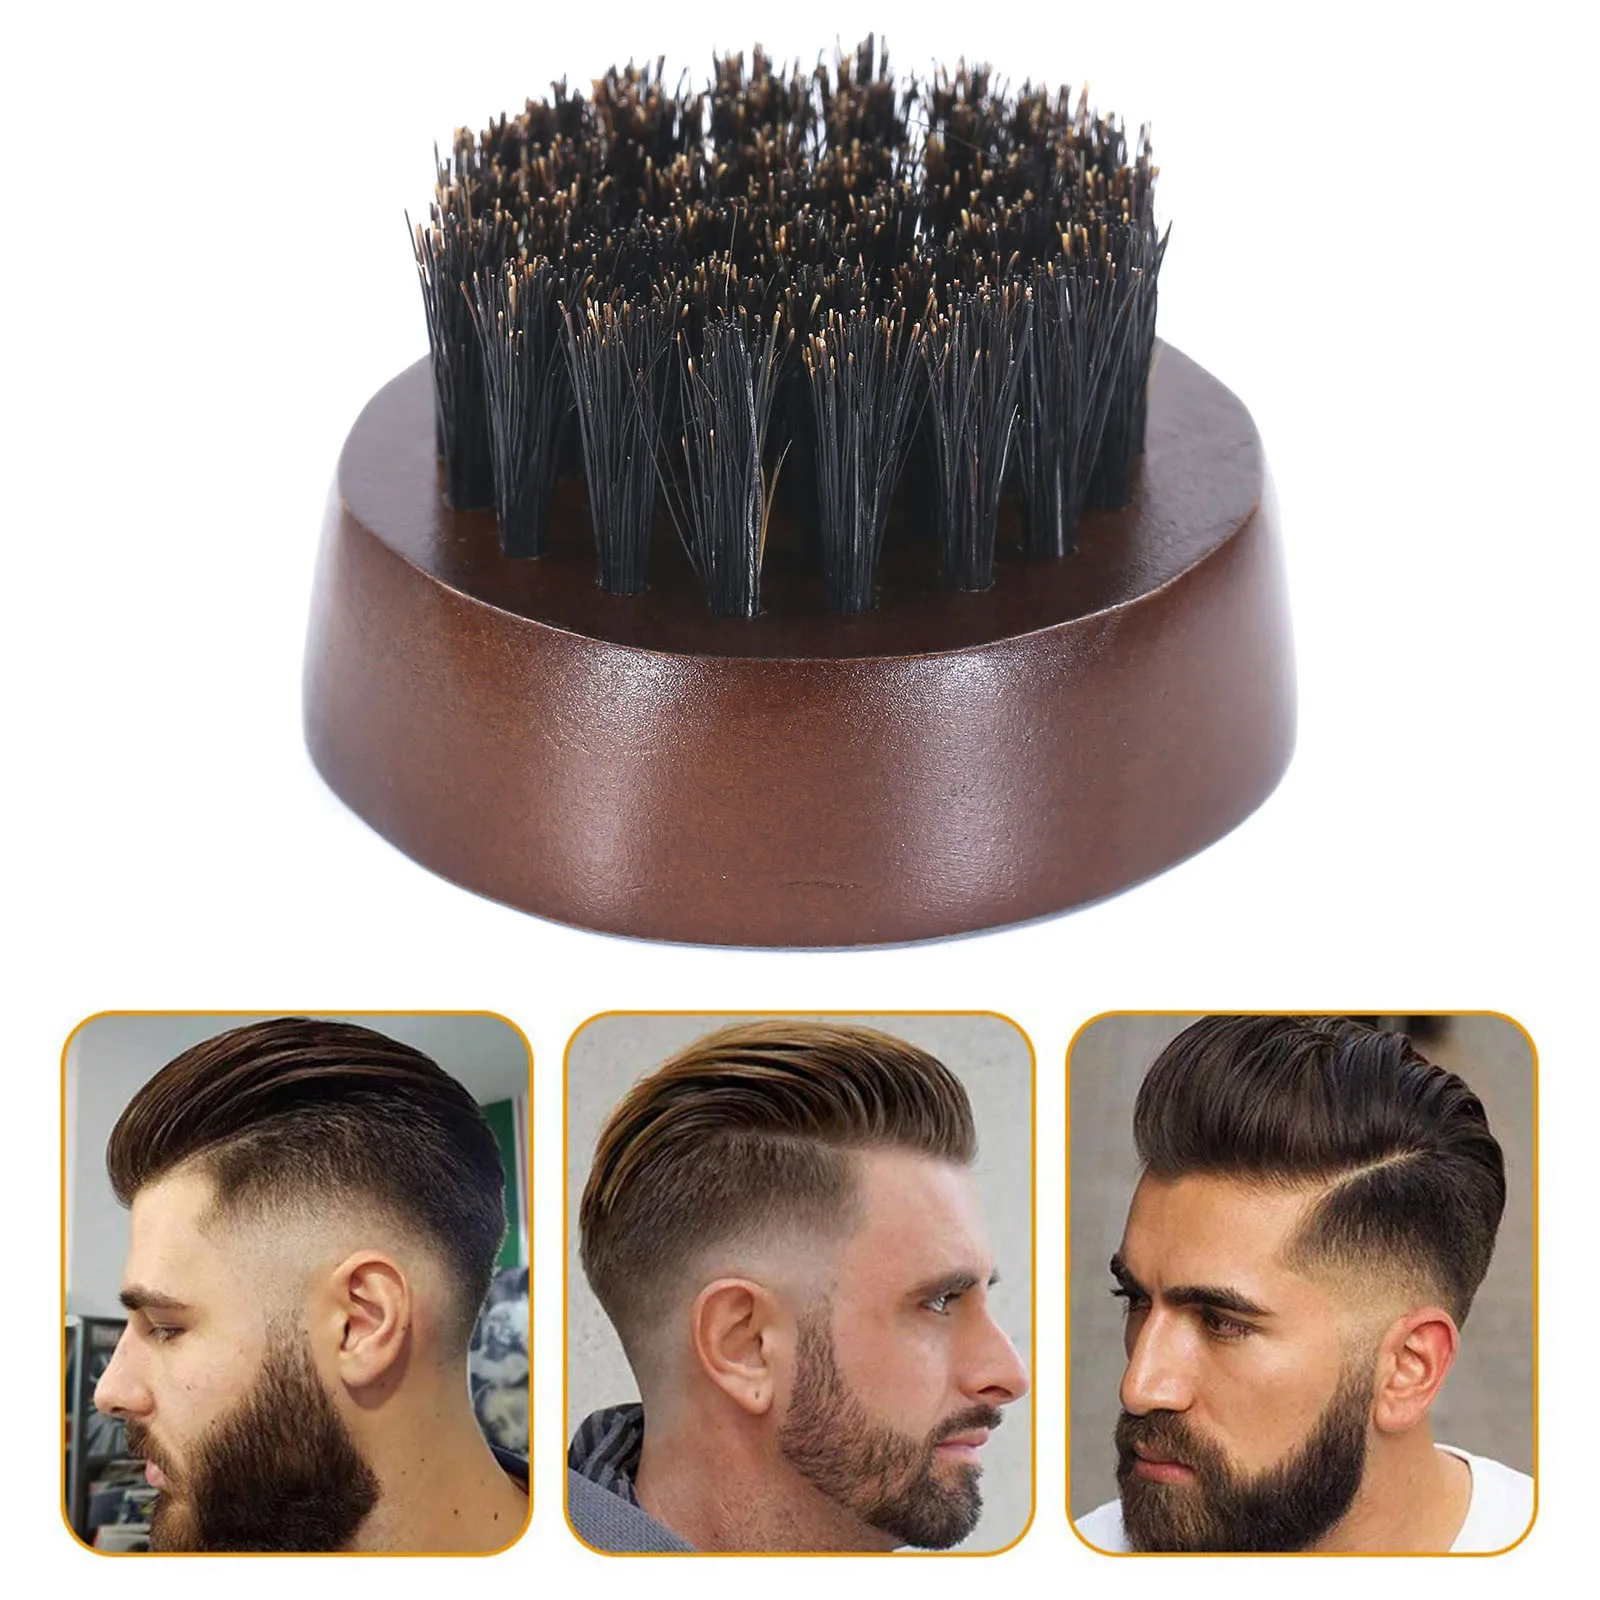 Wooden Hair Beard Brush Tame Hair Soften Your Facial Small and Round with Wooden Handle Styling Tools Grooming for Barber Men